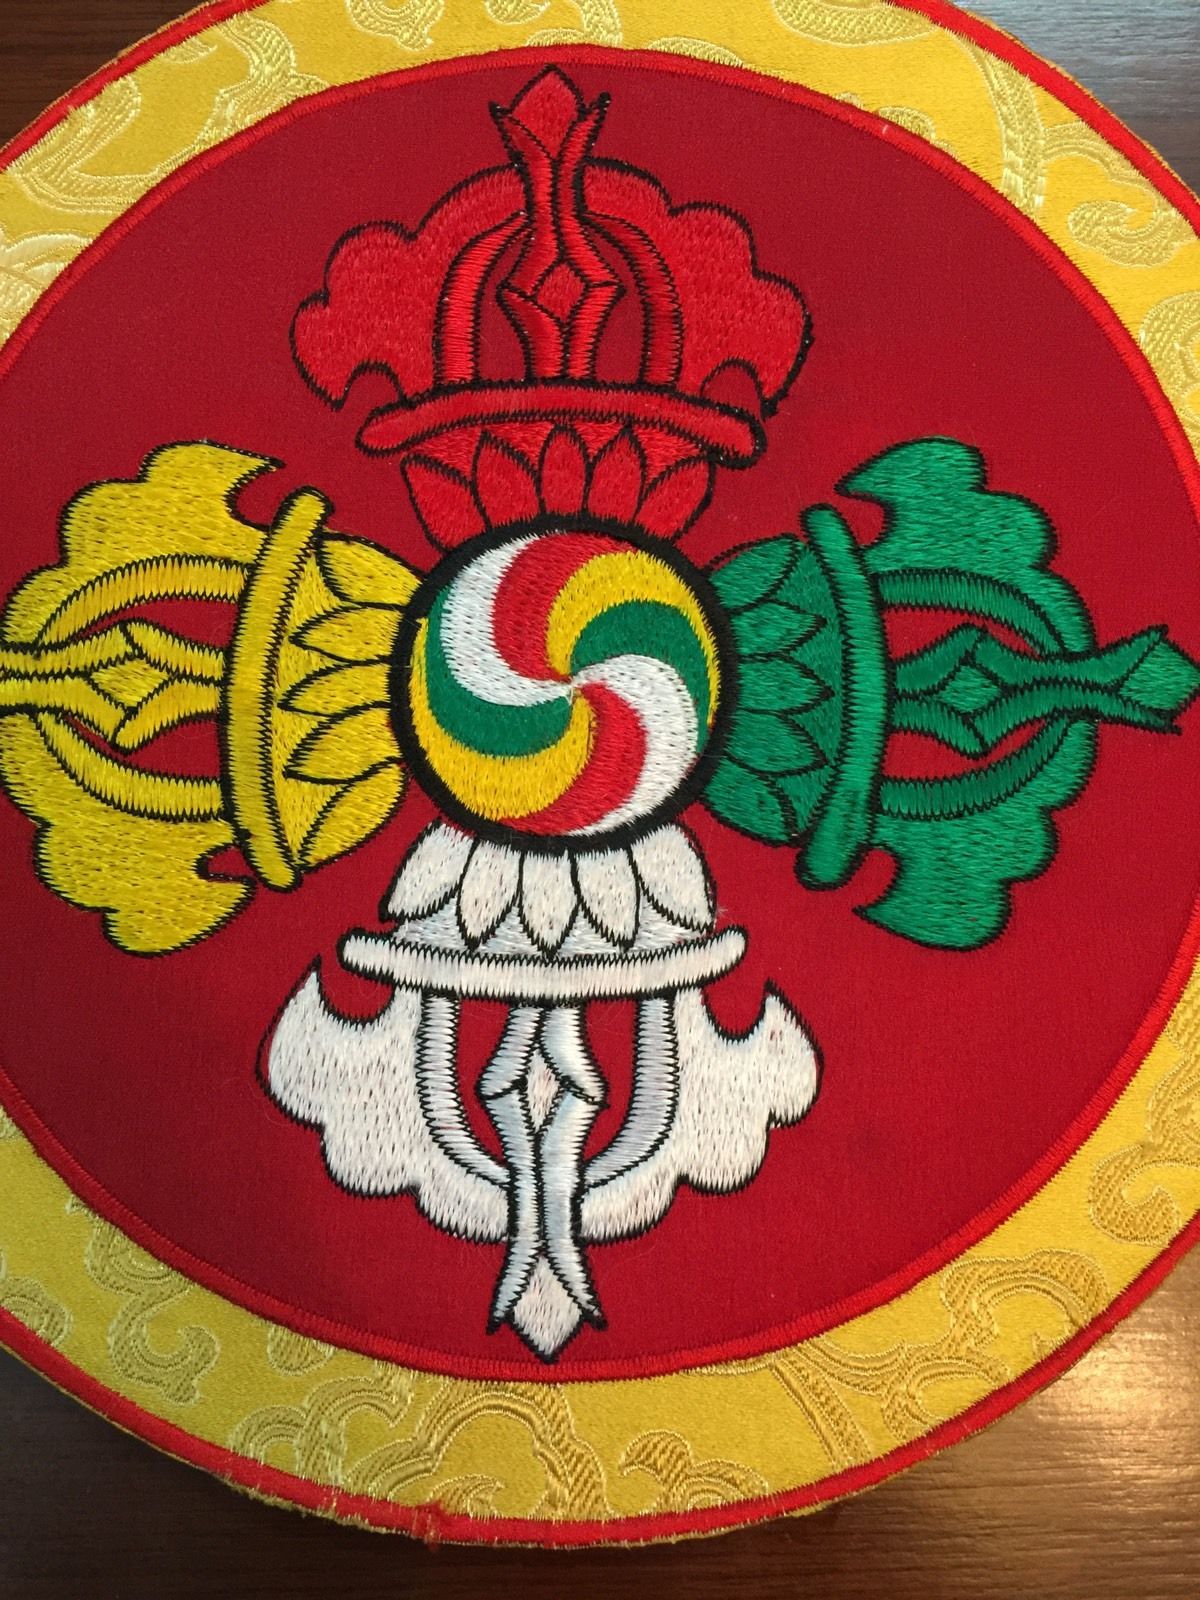 Tibetan Embroided Dorje Round Placemat/Table Cover